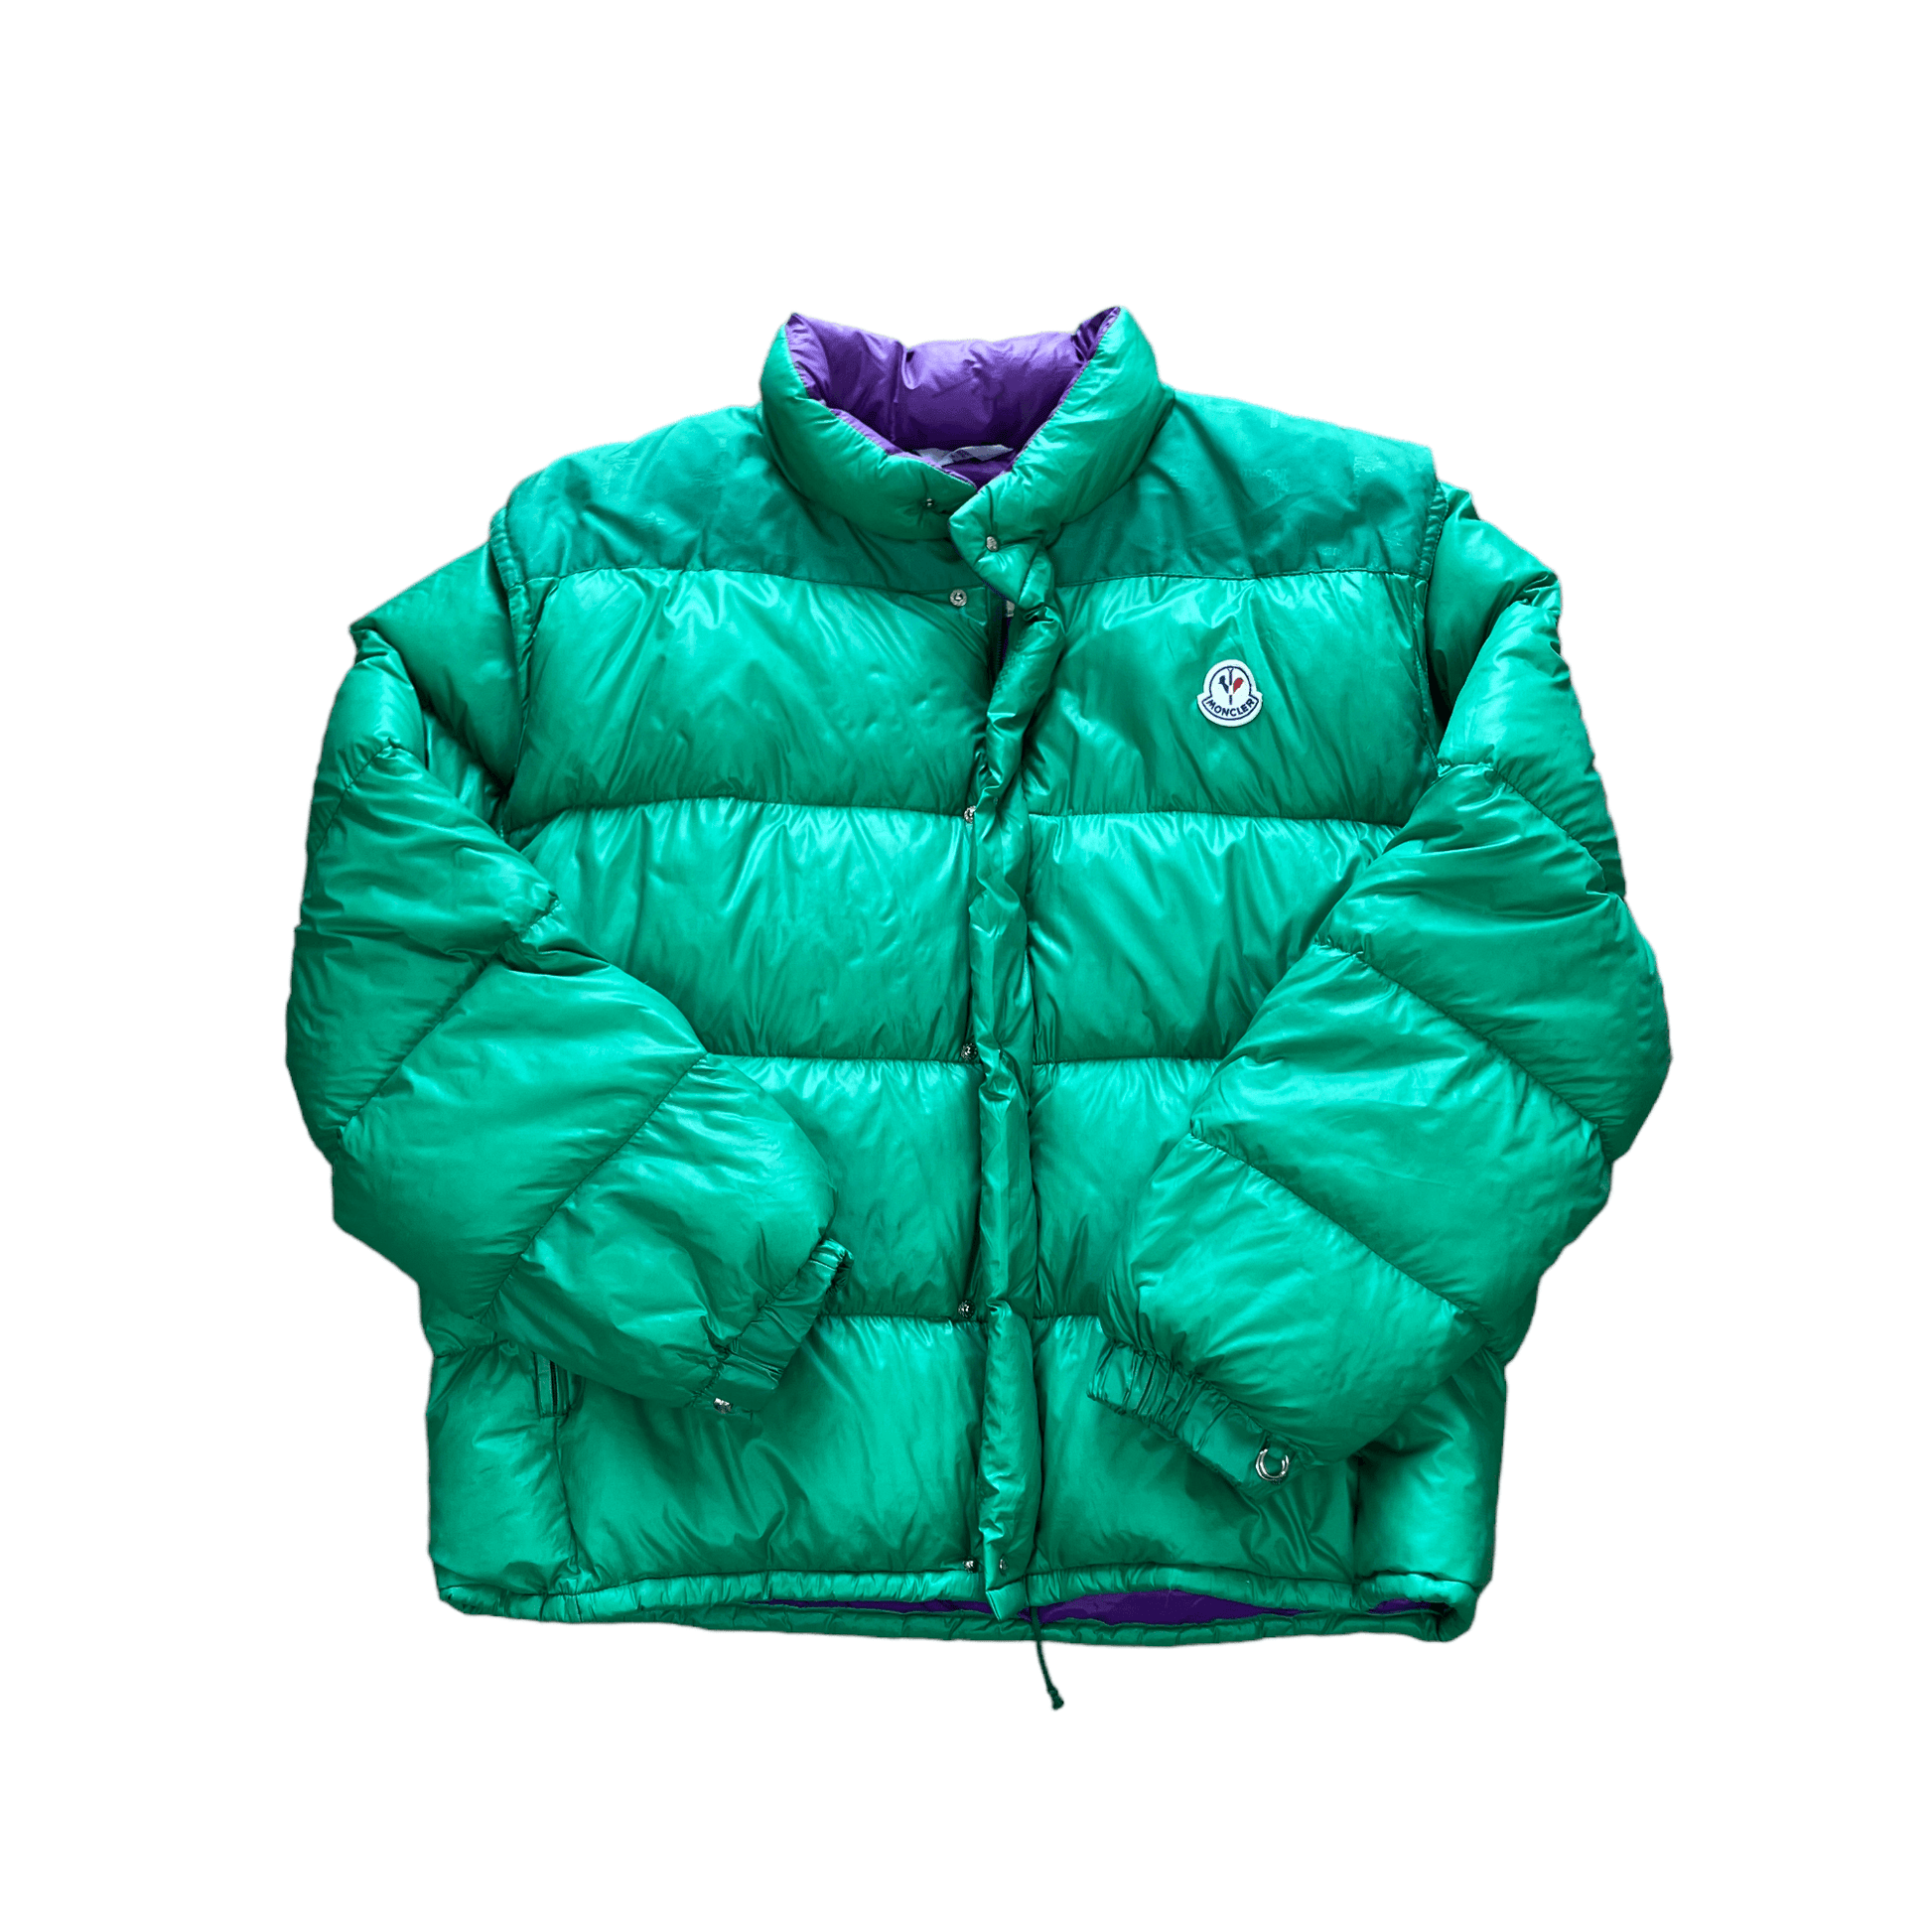 Vintage 90s Green Moncler Grenoble Puffer Coat - Extra Large - The Streetwear Studio